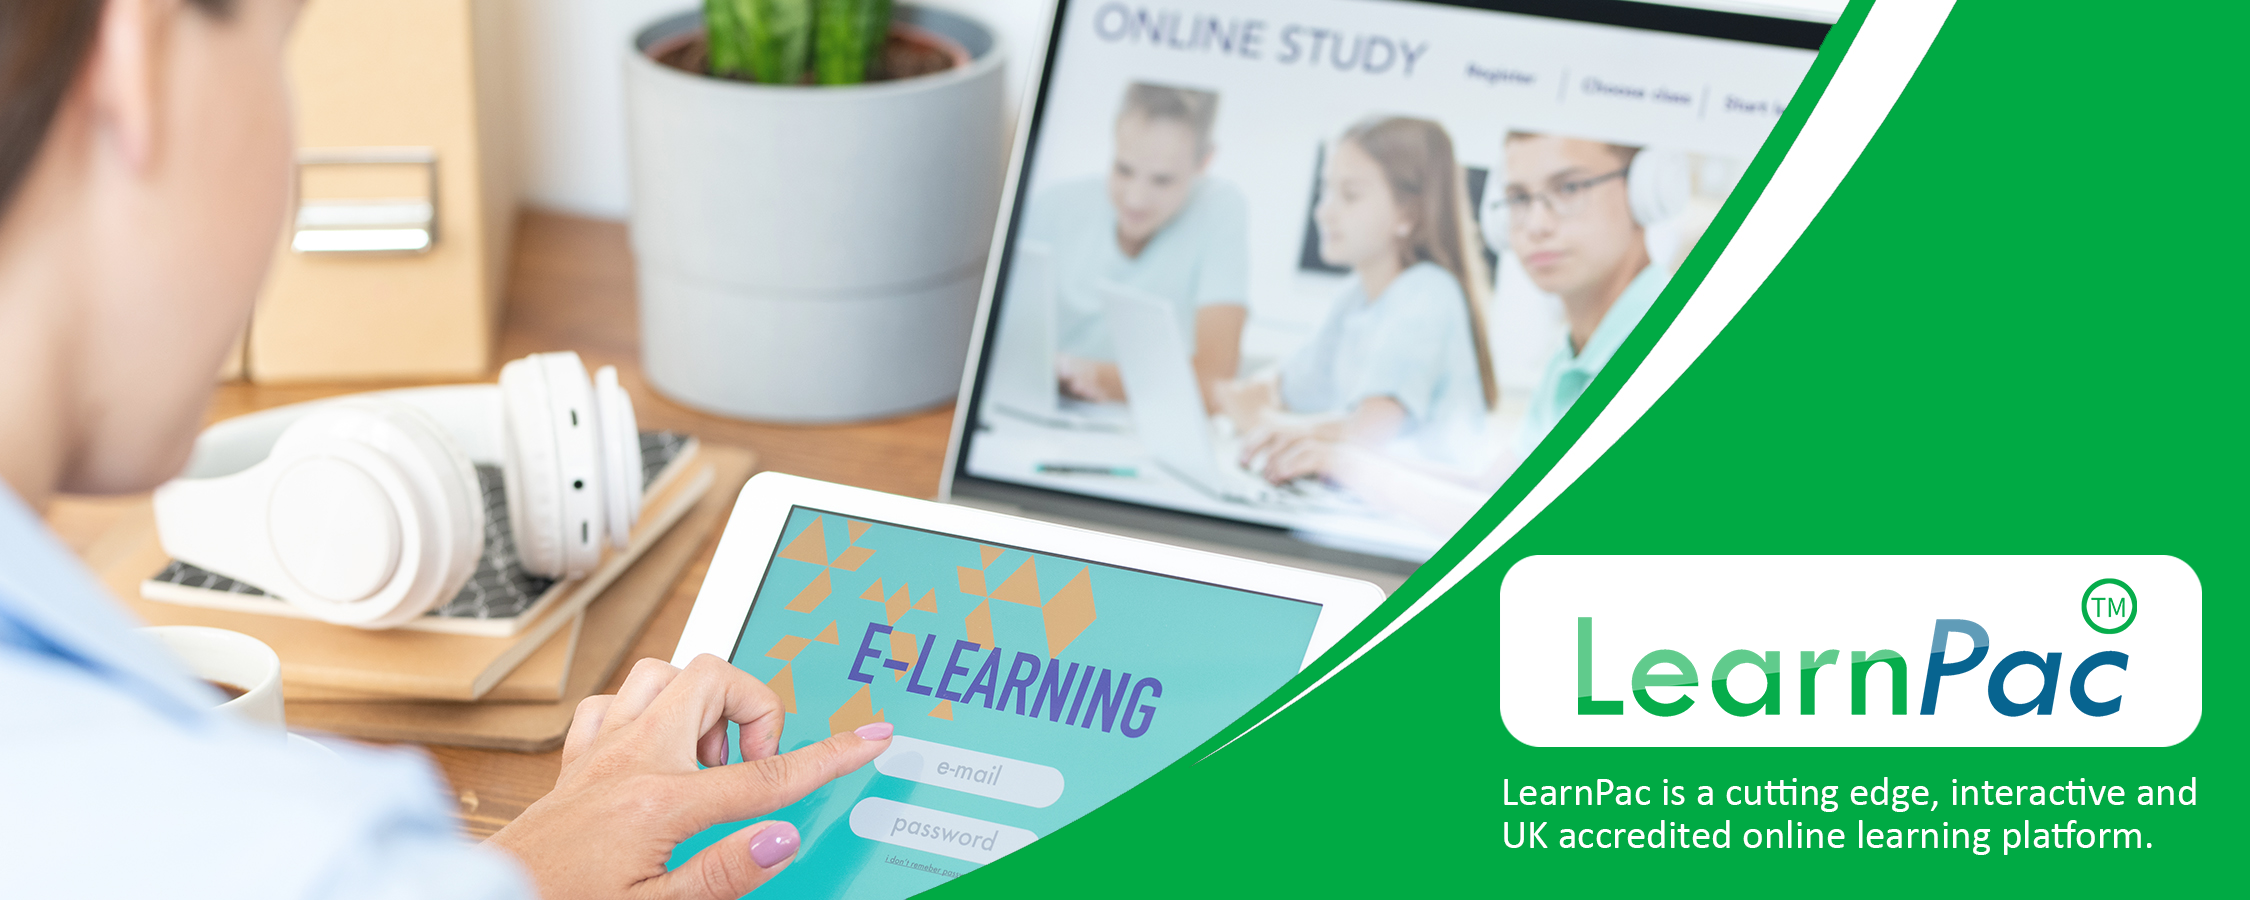 Contact Centre Training - Online Learning Courses - E-Learning Courses - LearnPac Systems UK -